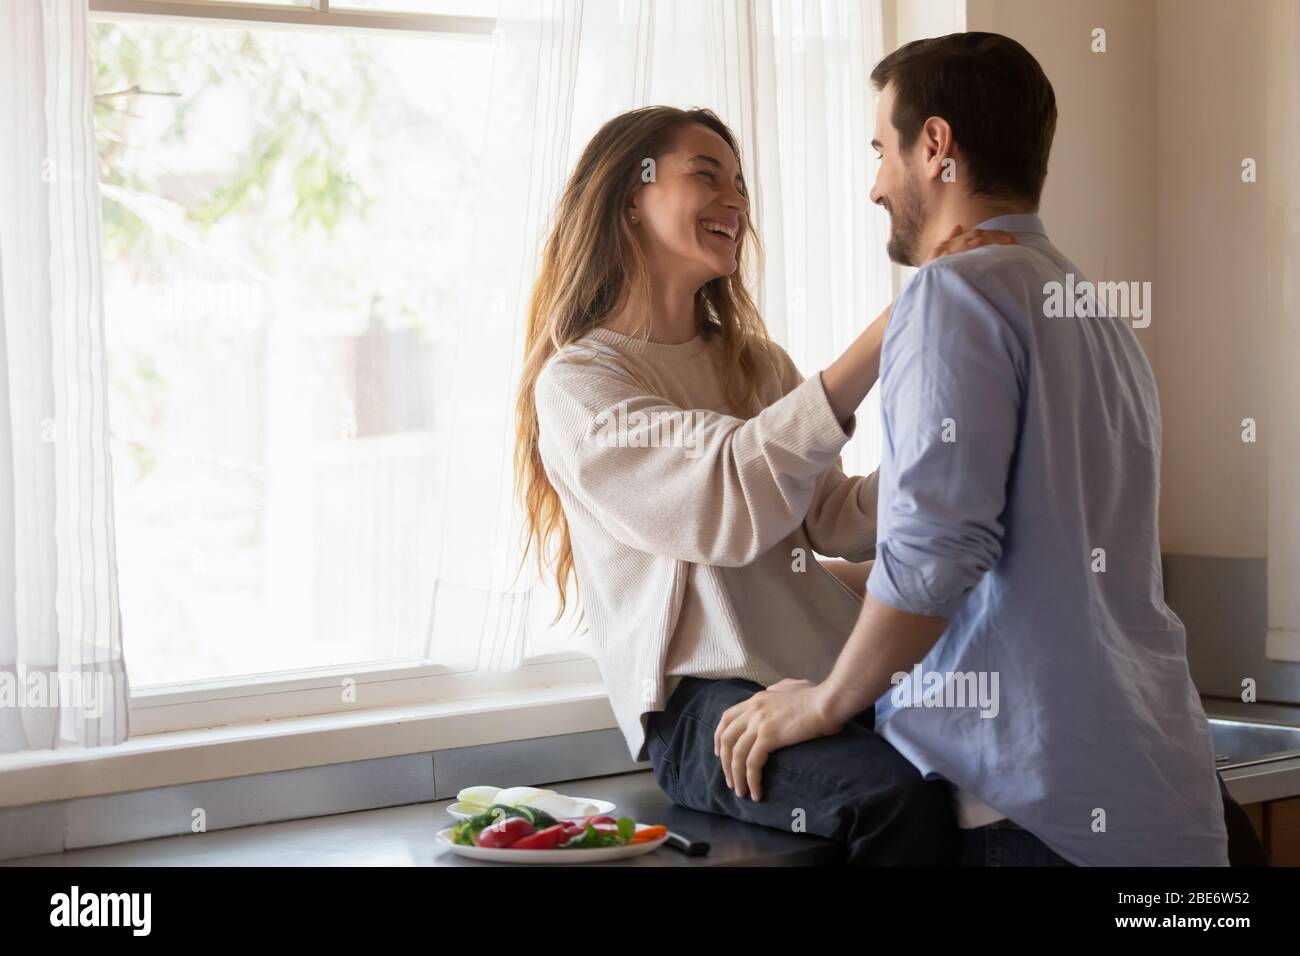 Smiling young lady sitting on countertop, chatting with husband. Stock Photo